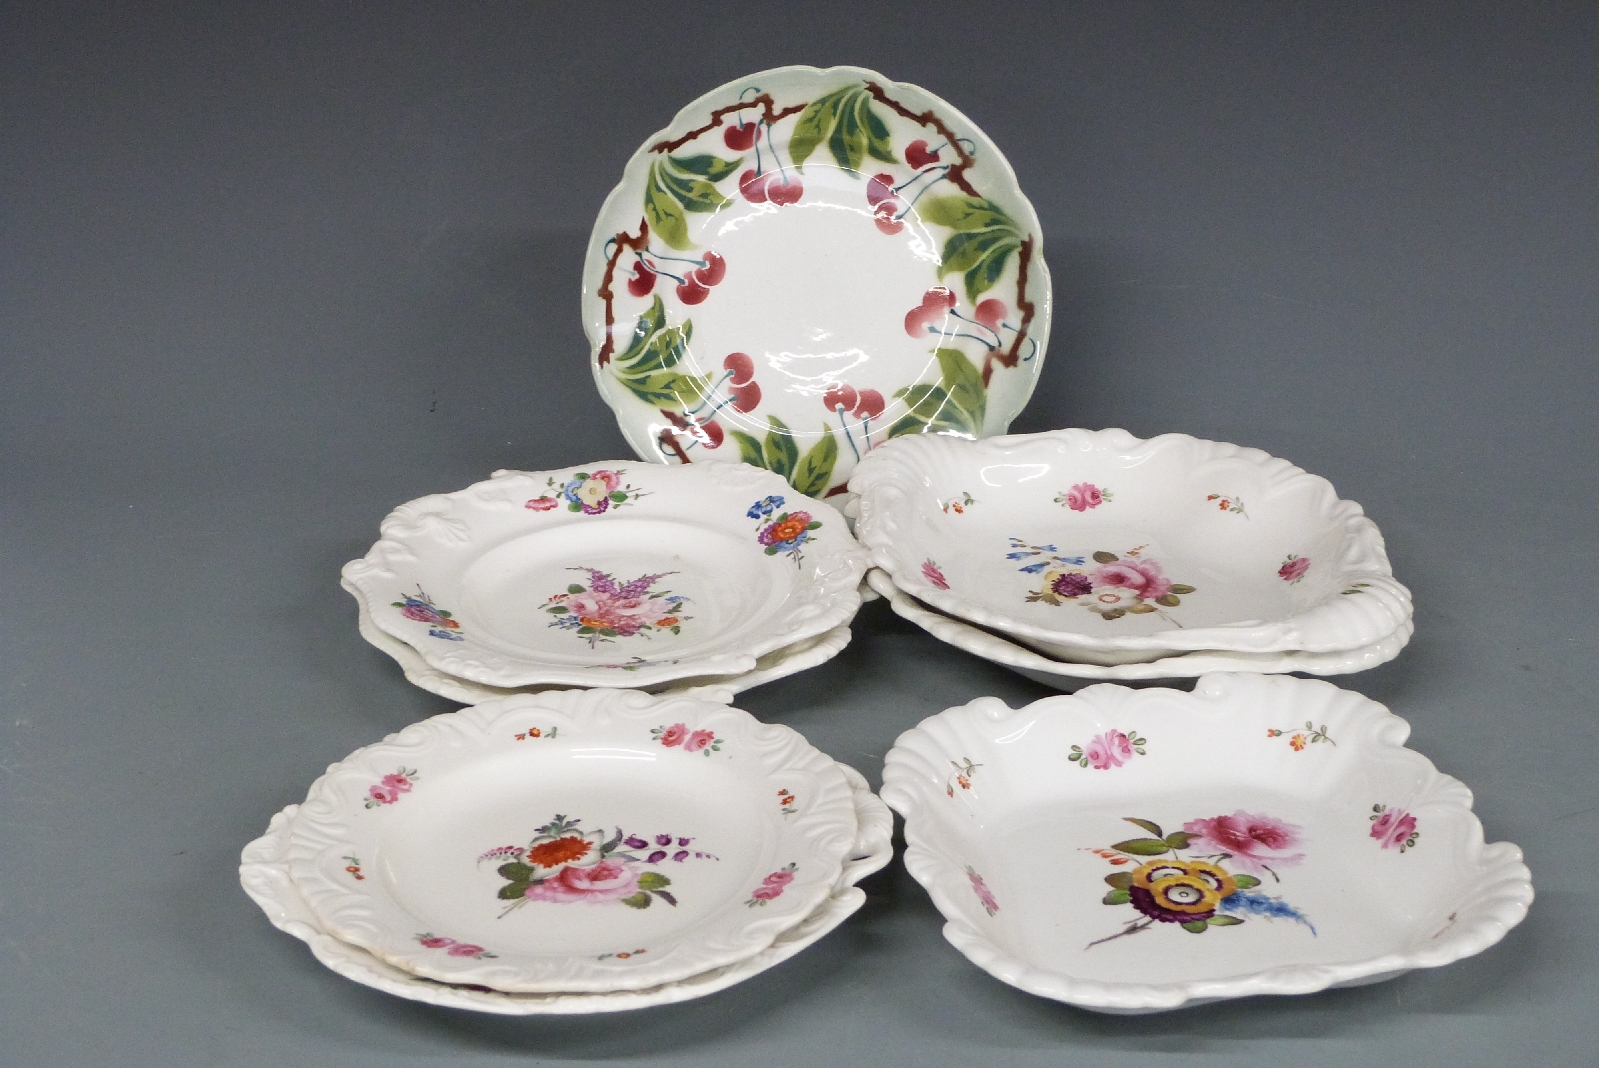 Continental dessert service, Chinese and Japanese export plates, French plates and a German ribbon